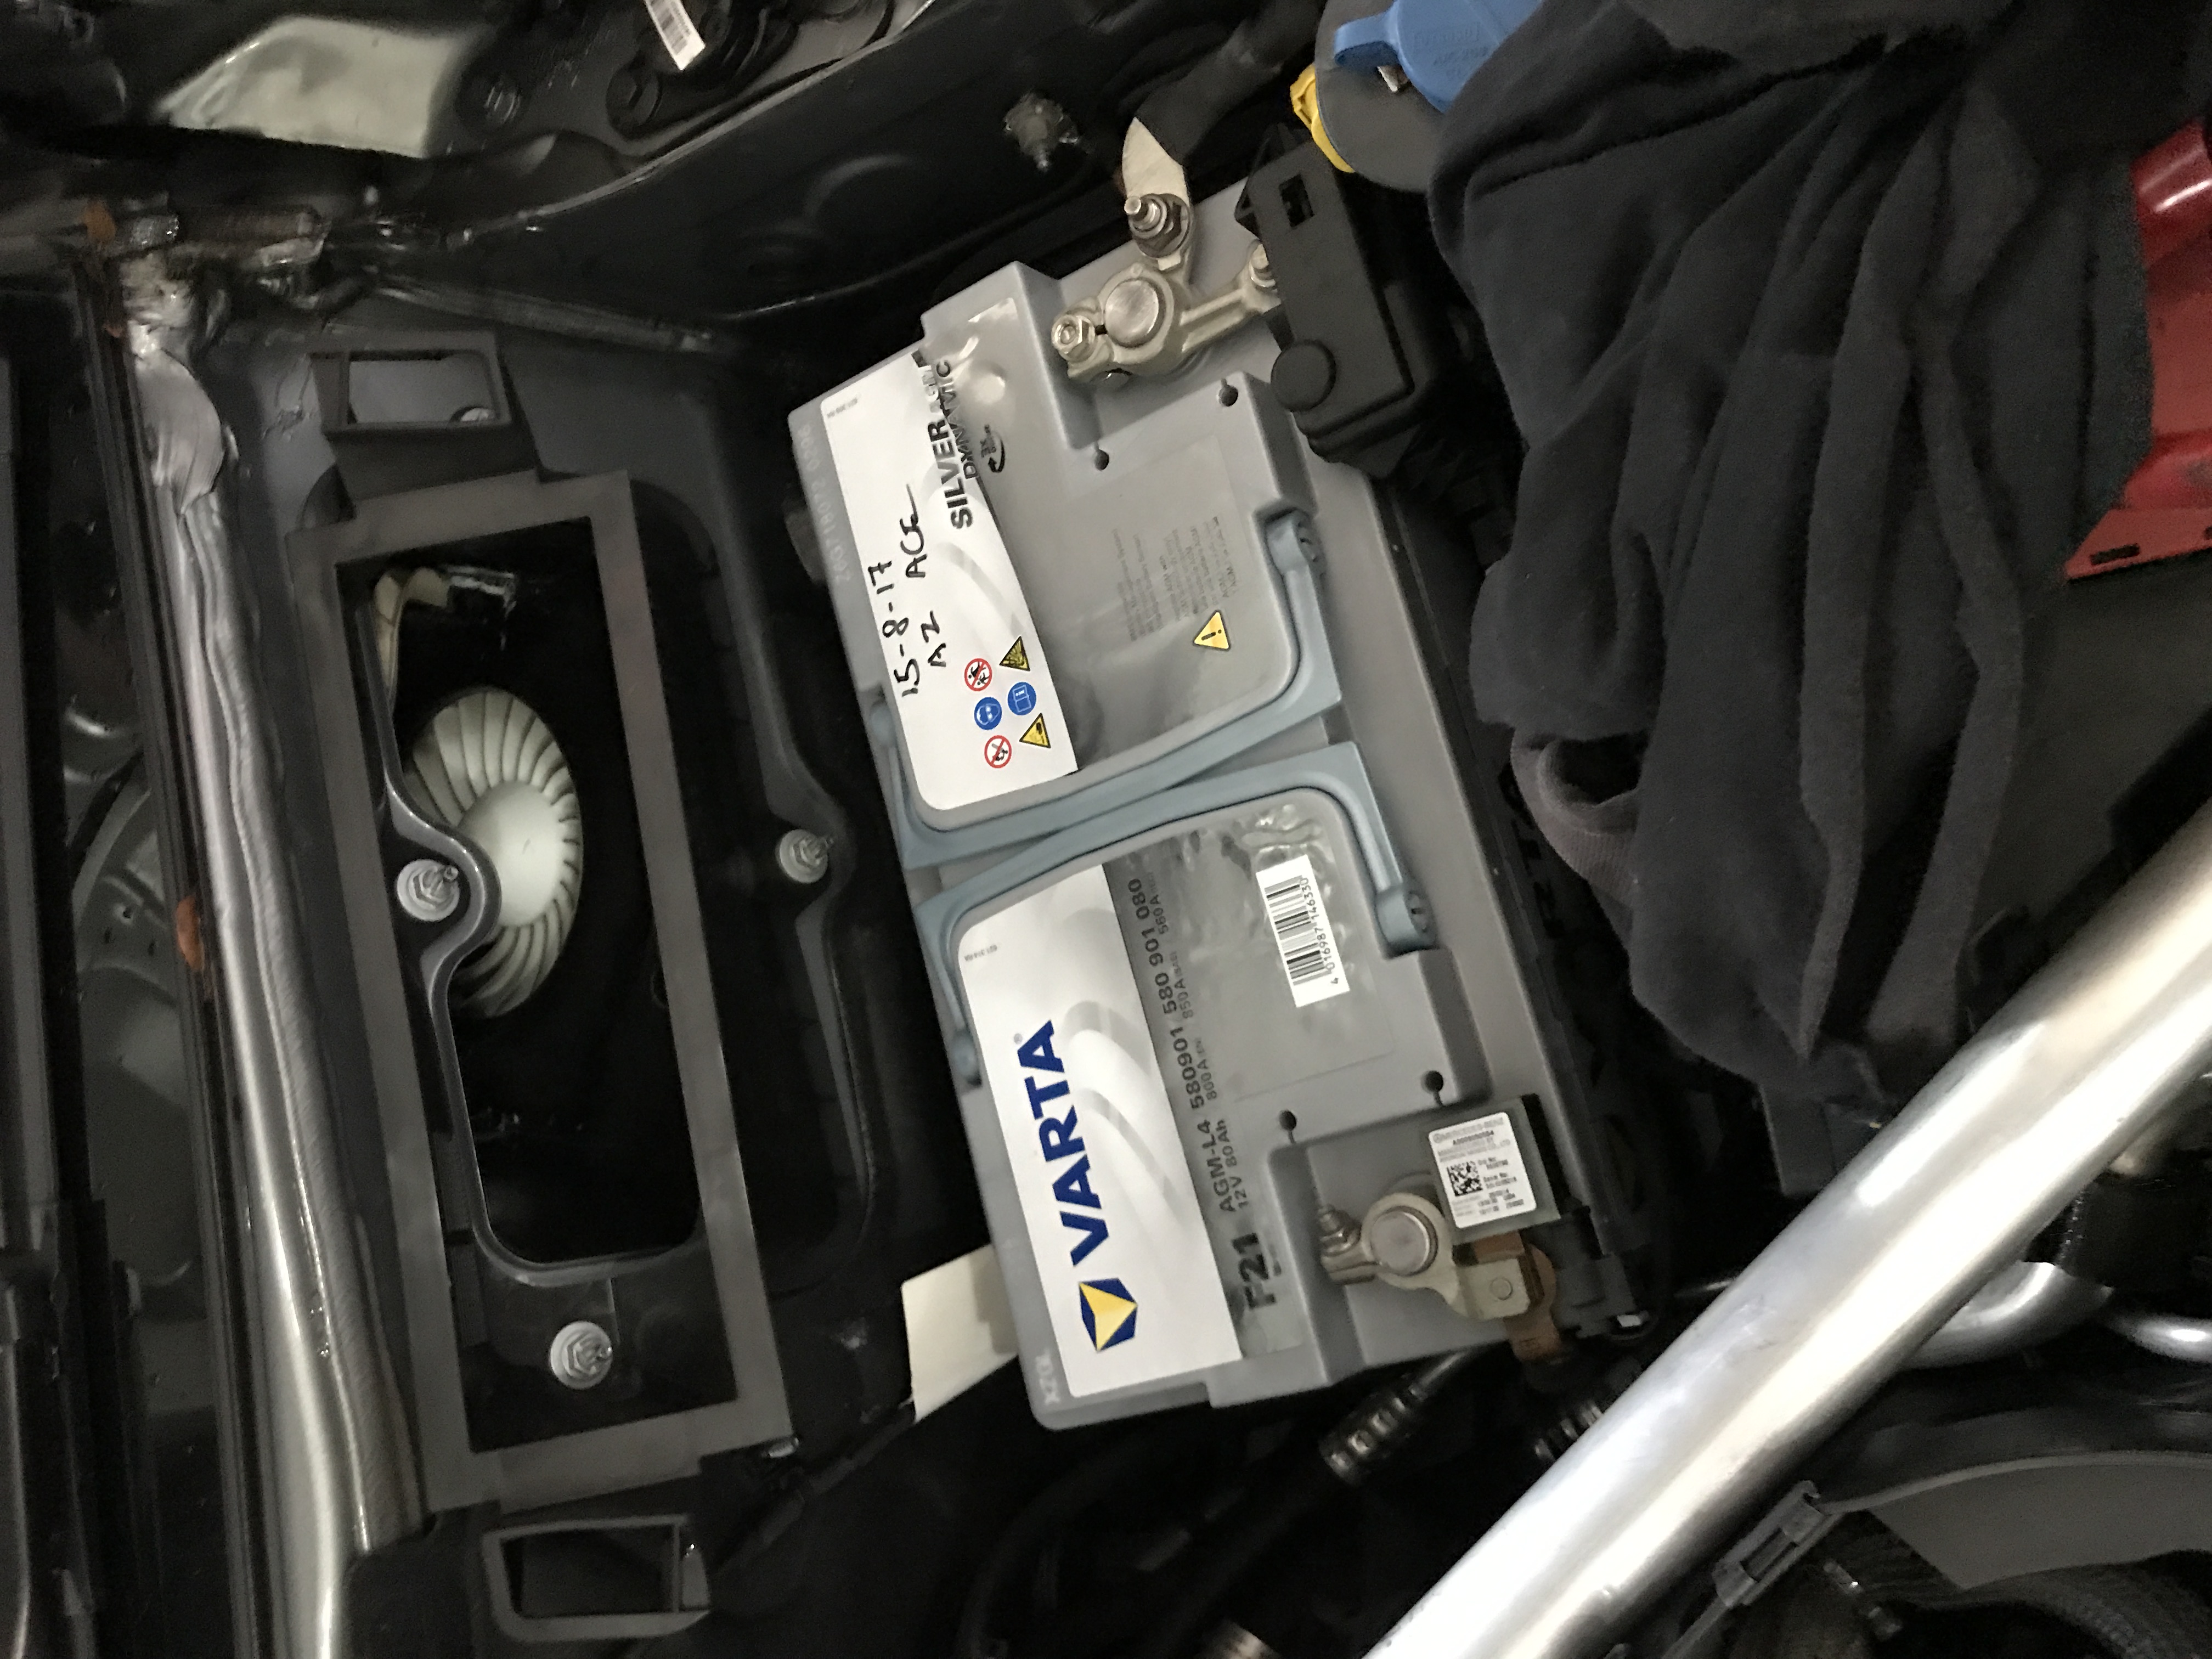 Mercedes C Class Auxiliary Battery Location